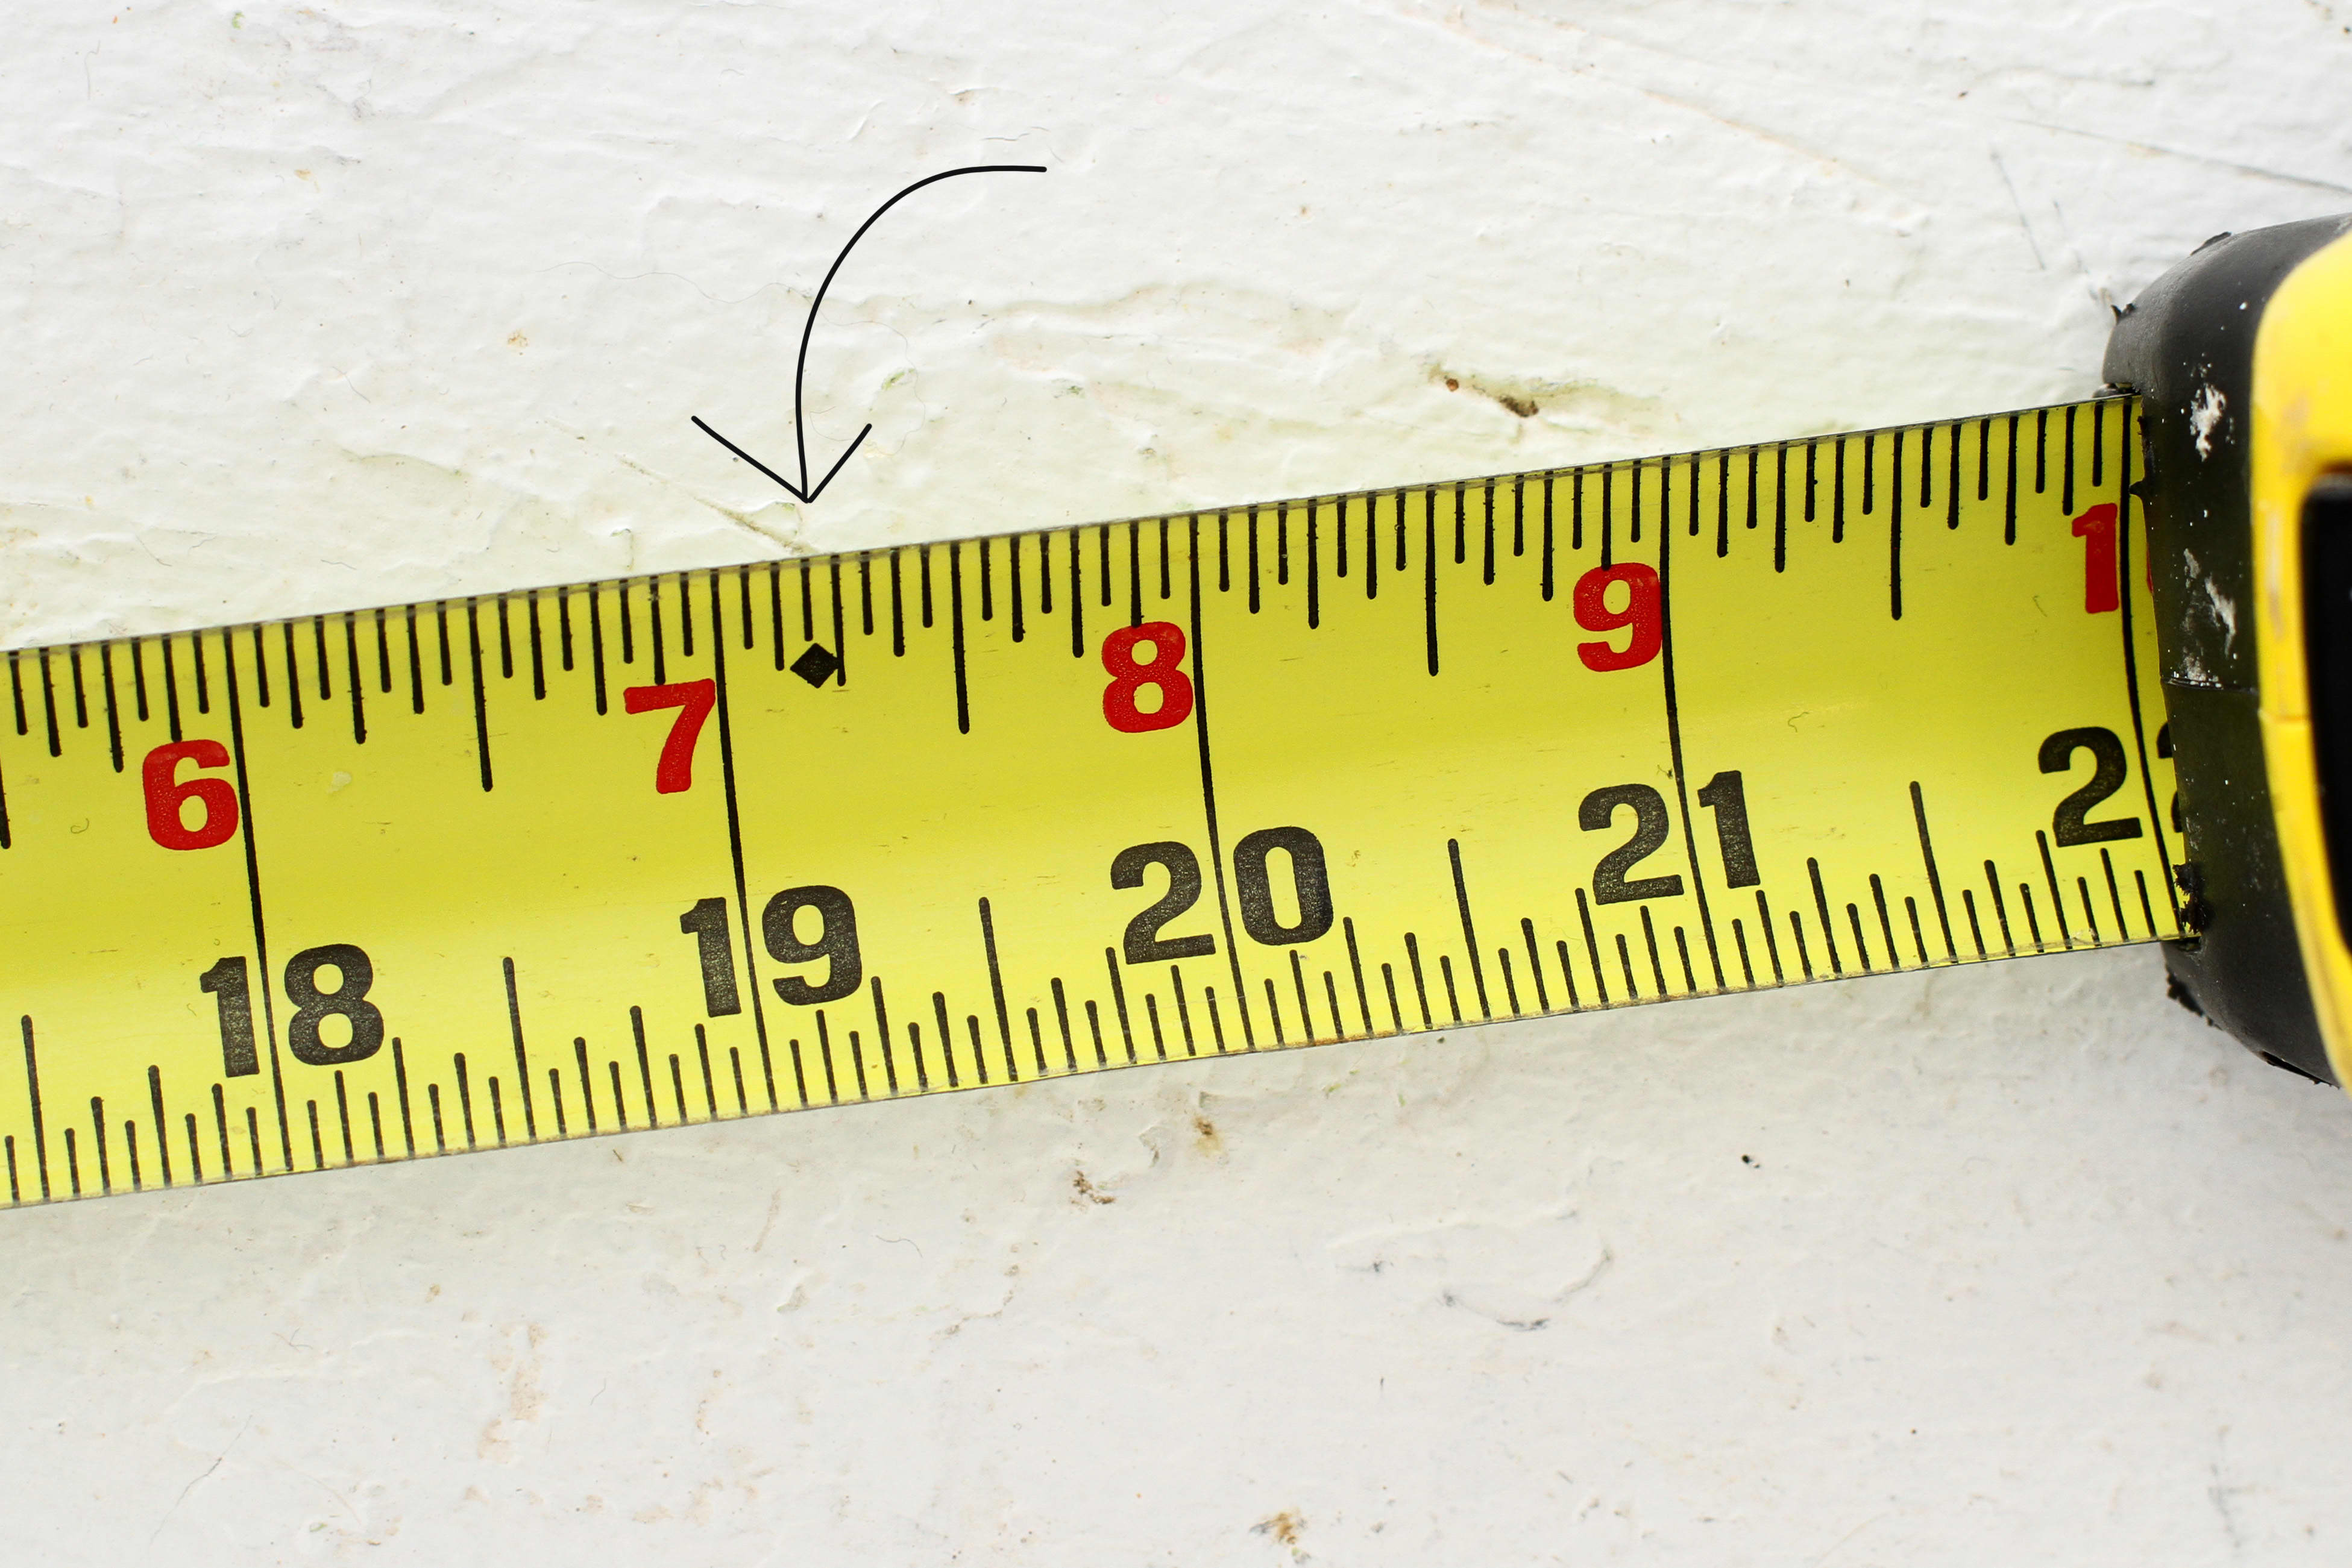 What Is 1/8 On A Tape Measure